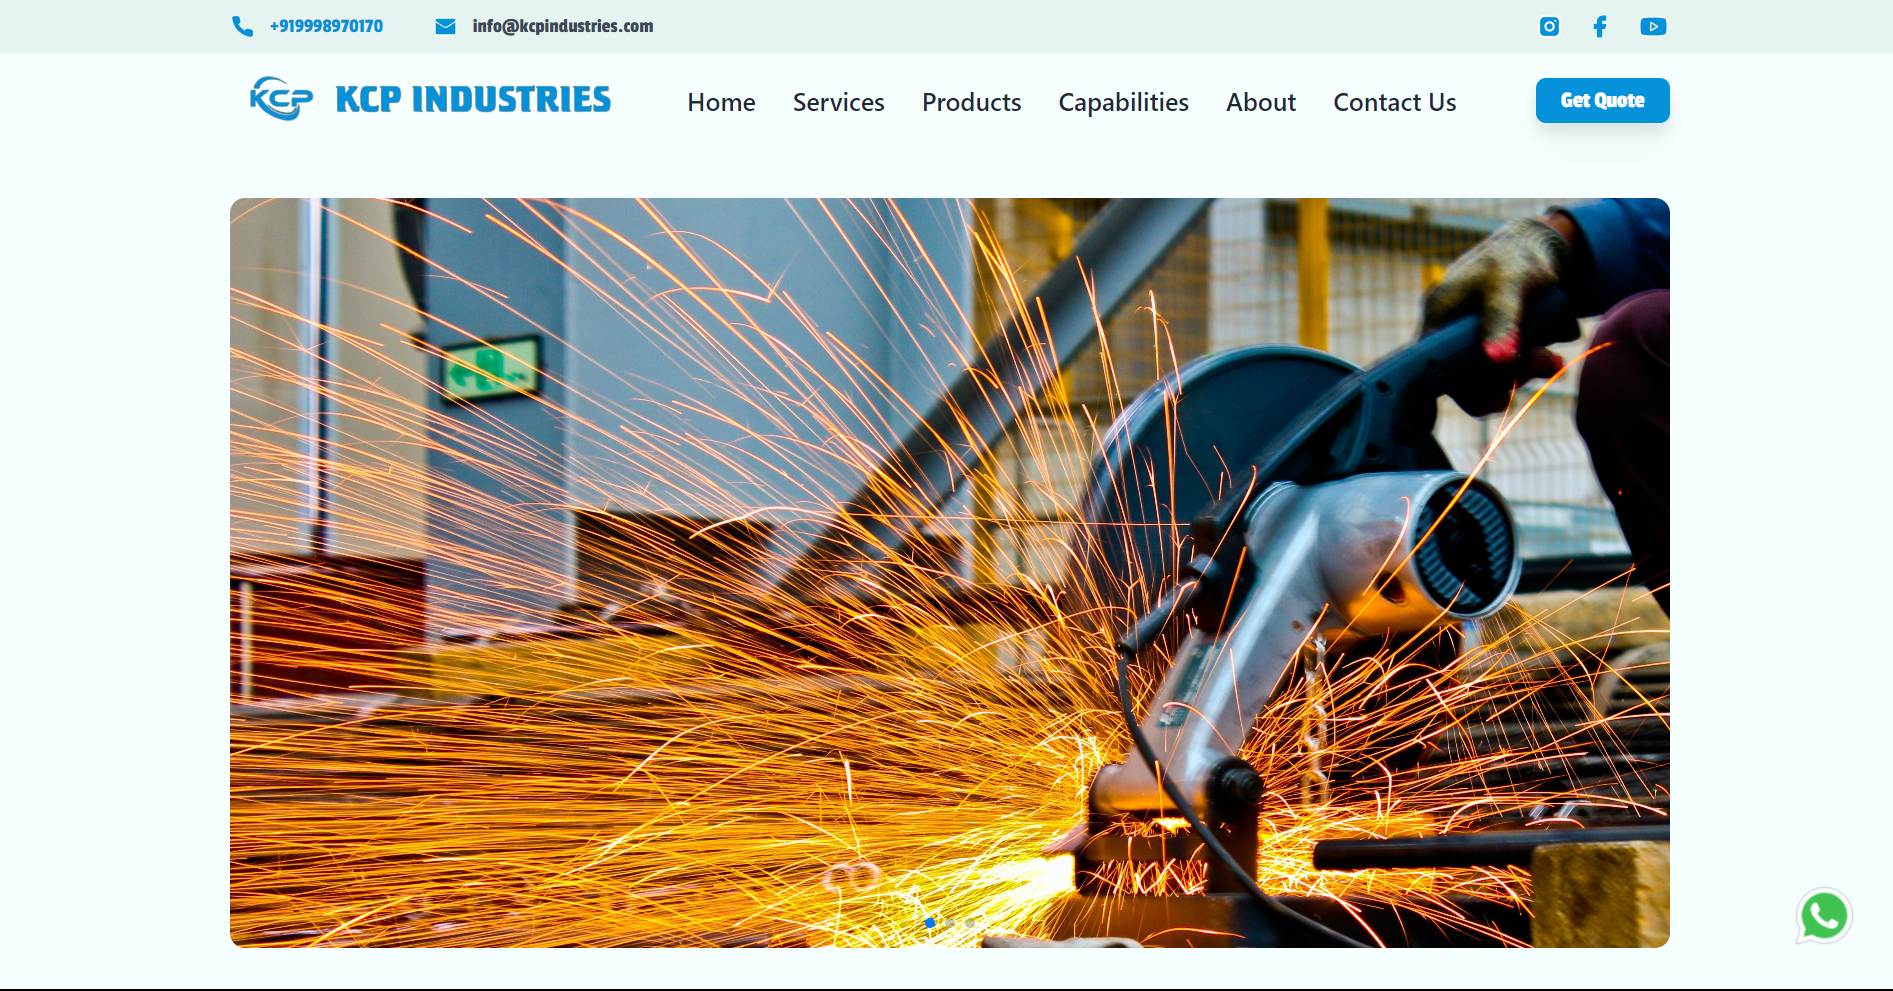 KCP Industries Home Page Screenshot